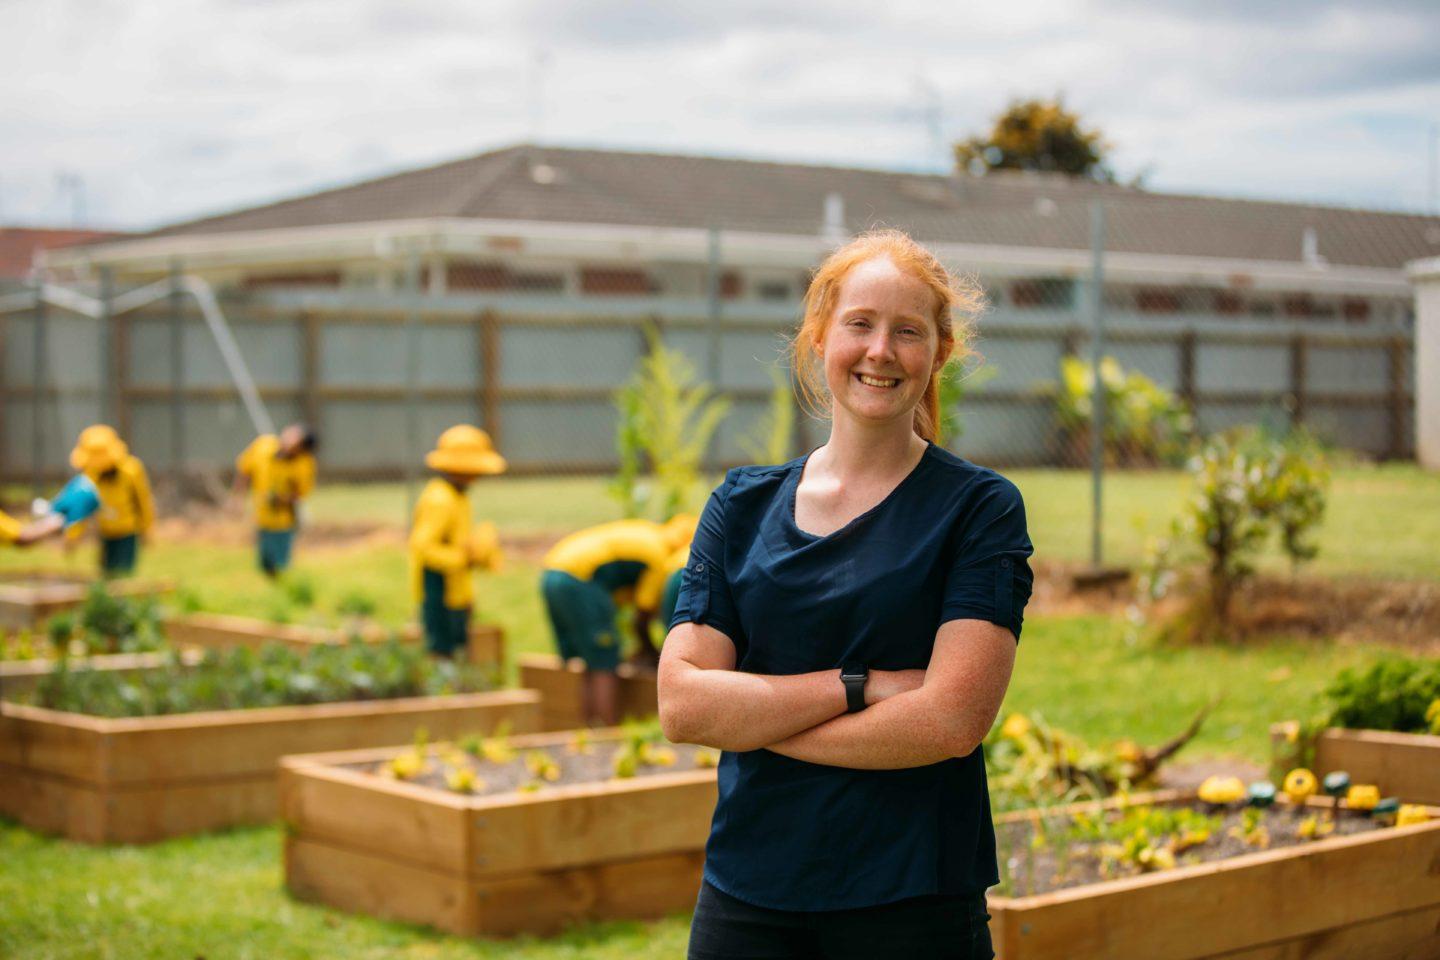 A teacher smiling with school students gardening in the background.